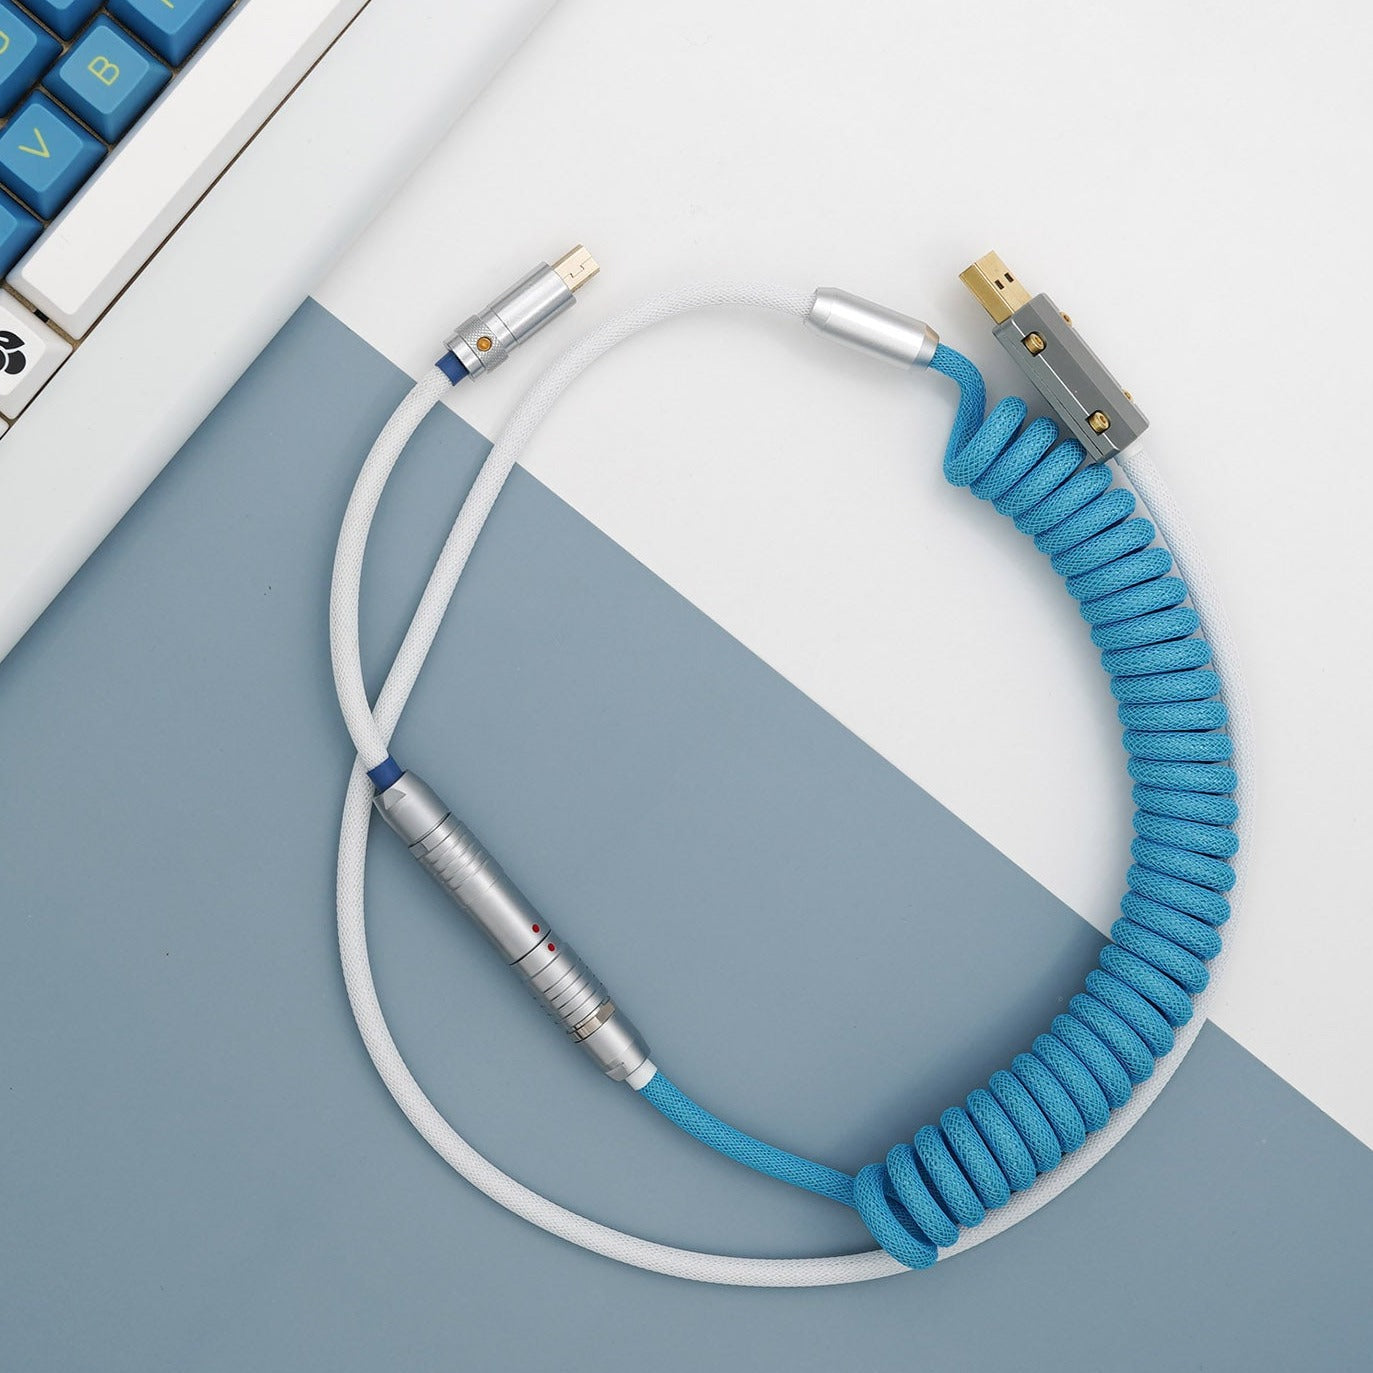 Sleeved Coiled Keyboard Aviator Cable, Lemo Style Connector - Blue/White